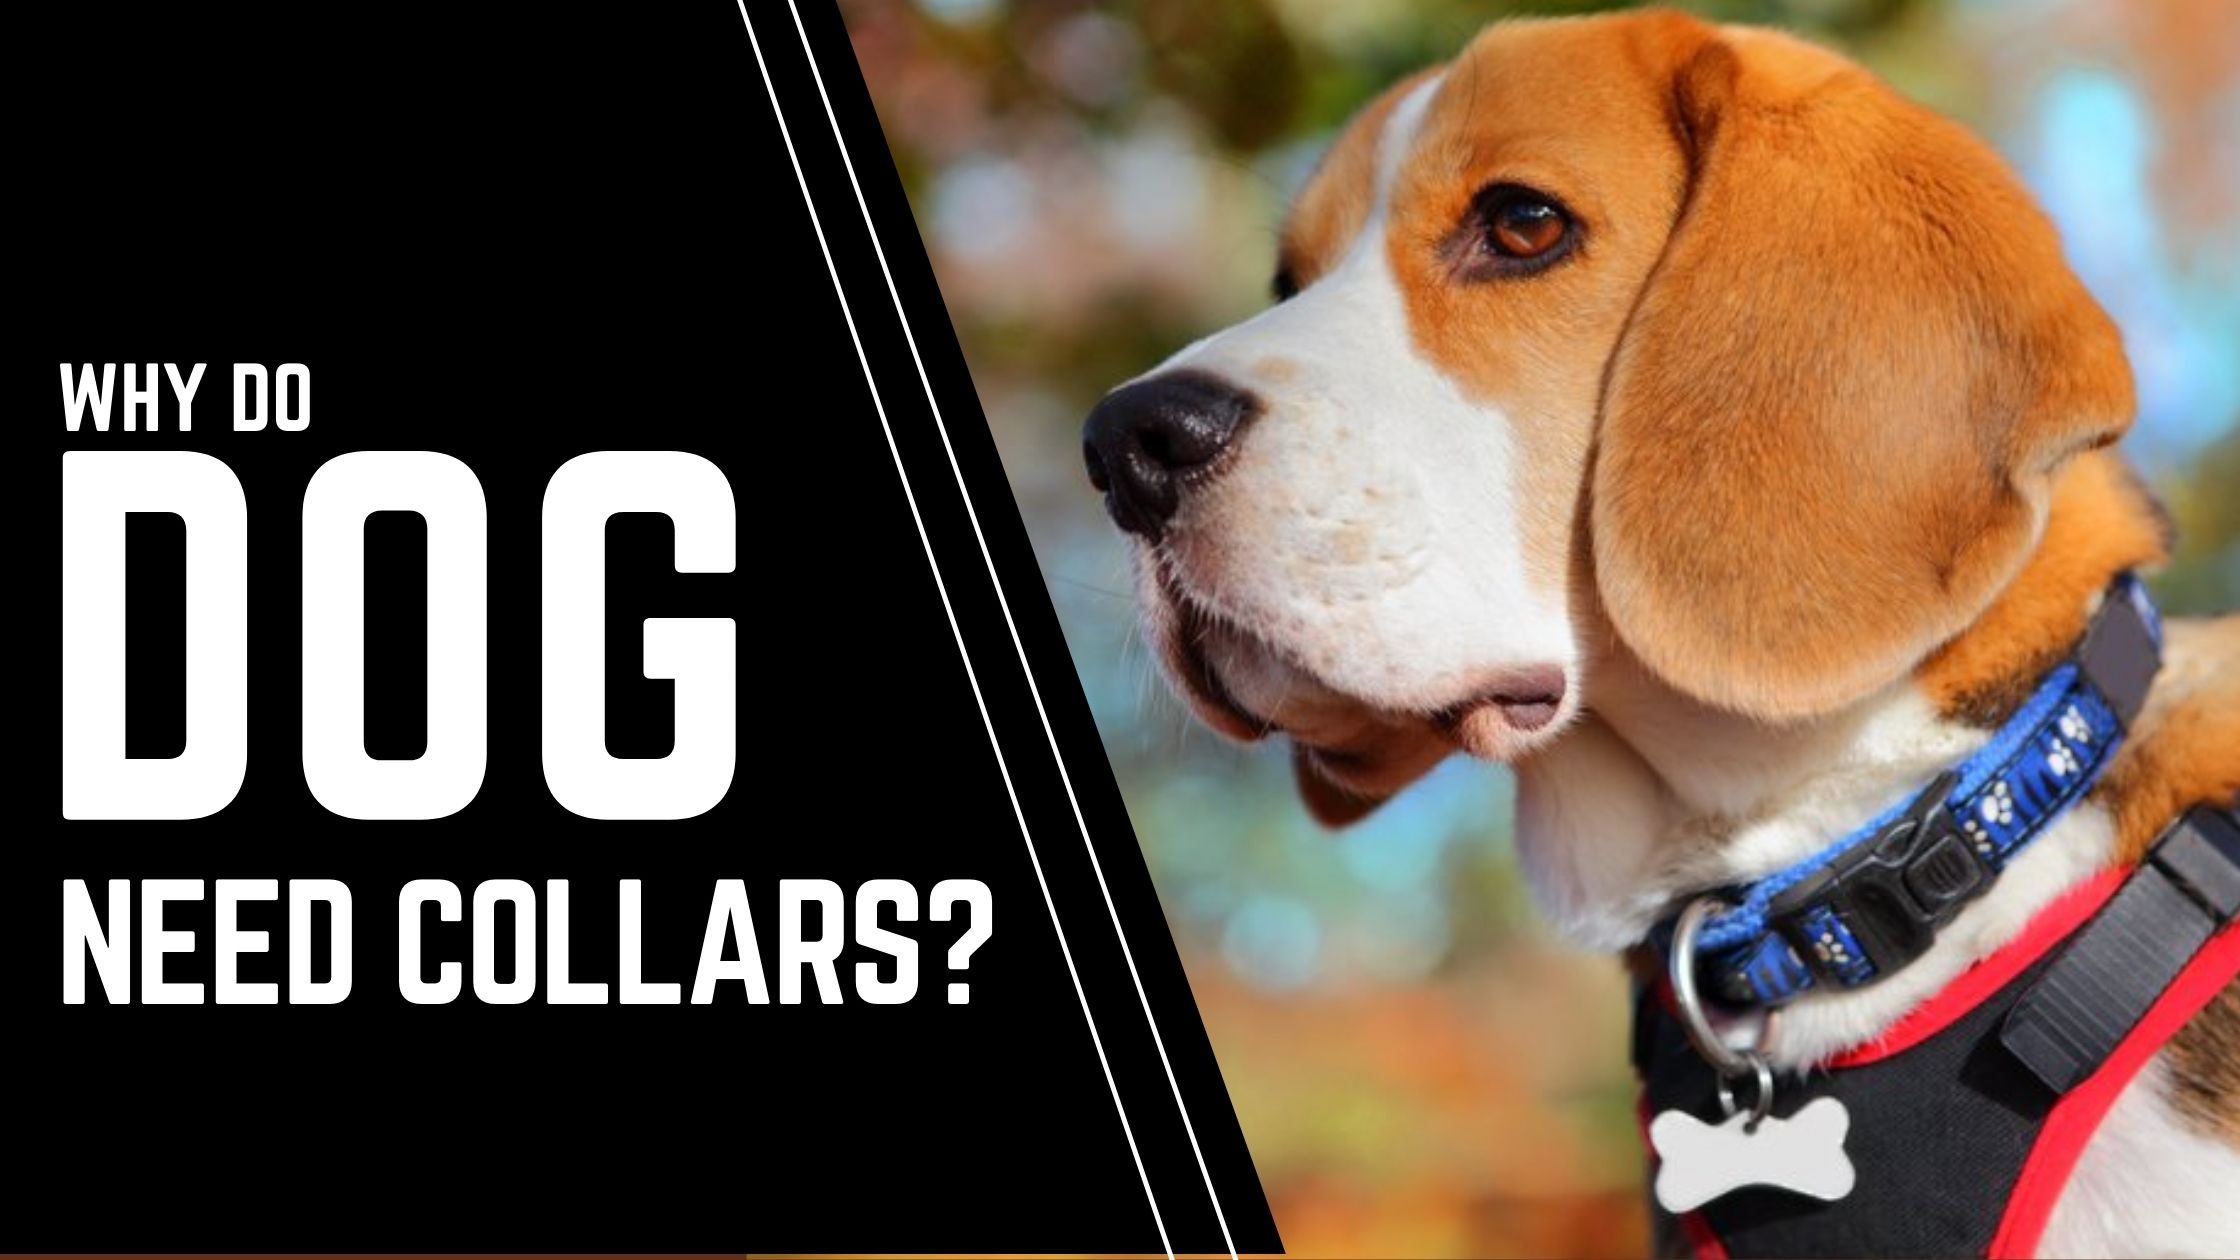 Why Do Dogs Need Collars